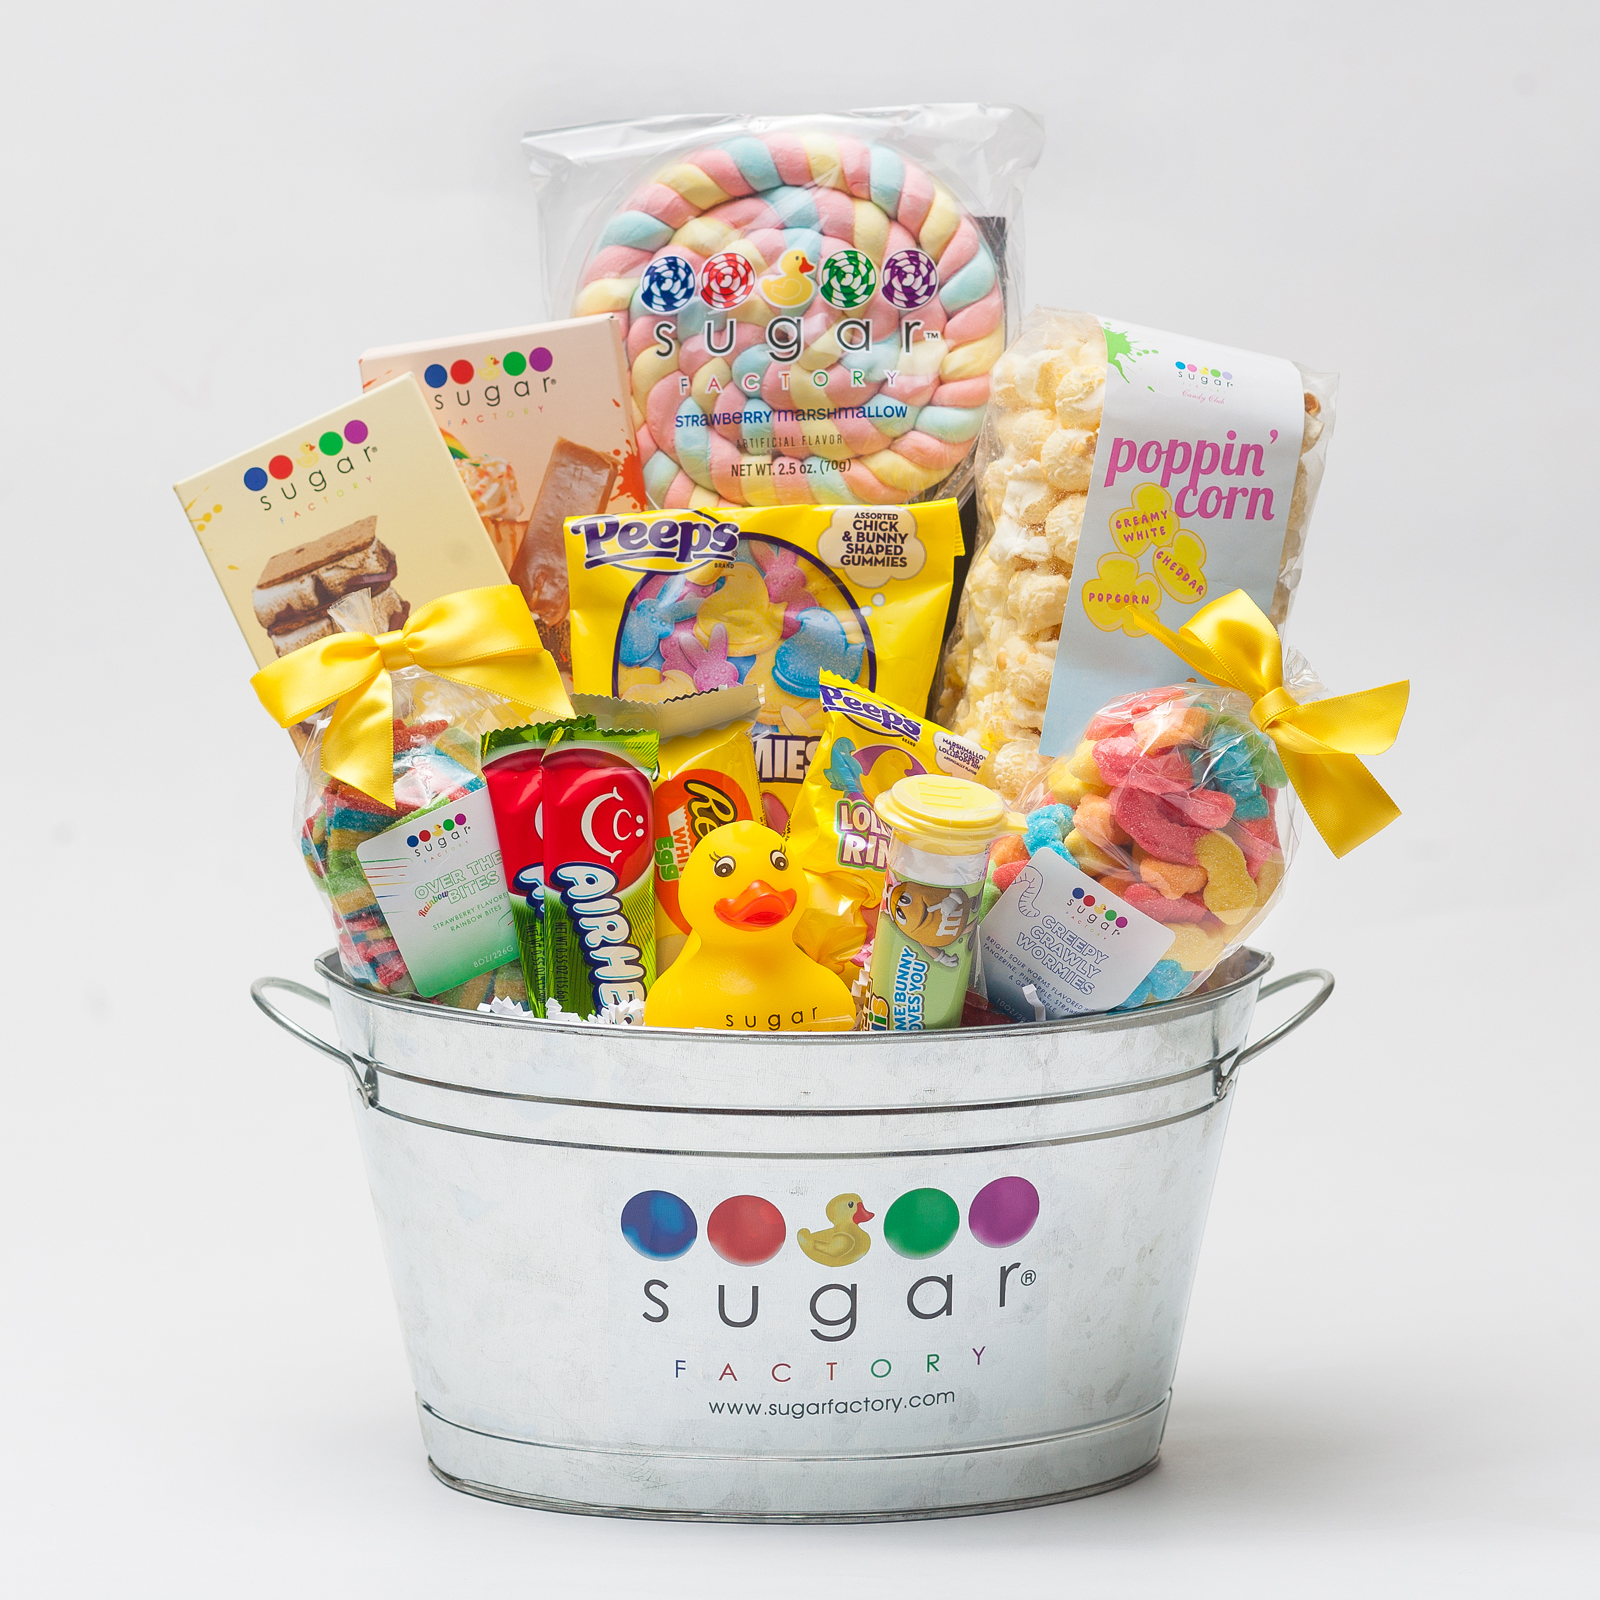 A photo of a bucket that says Sugar Factory and filled with candy